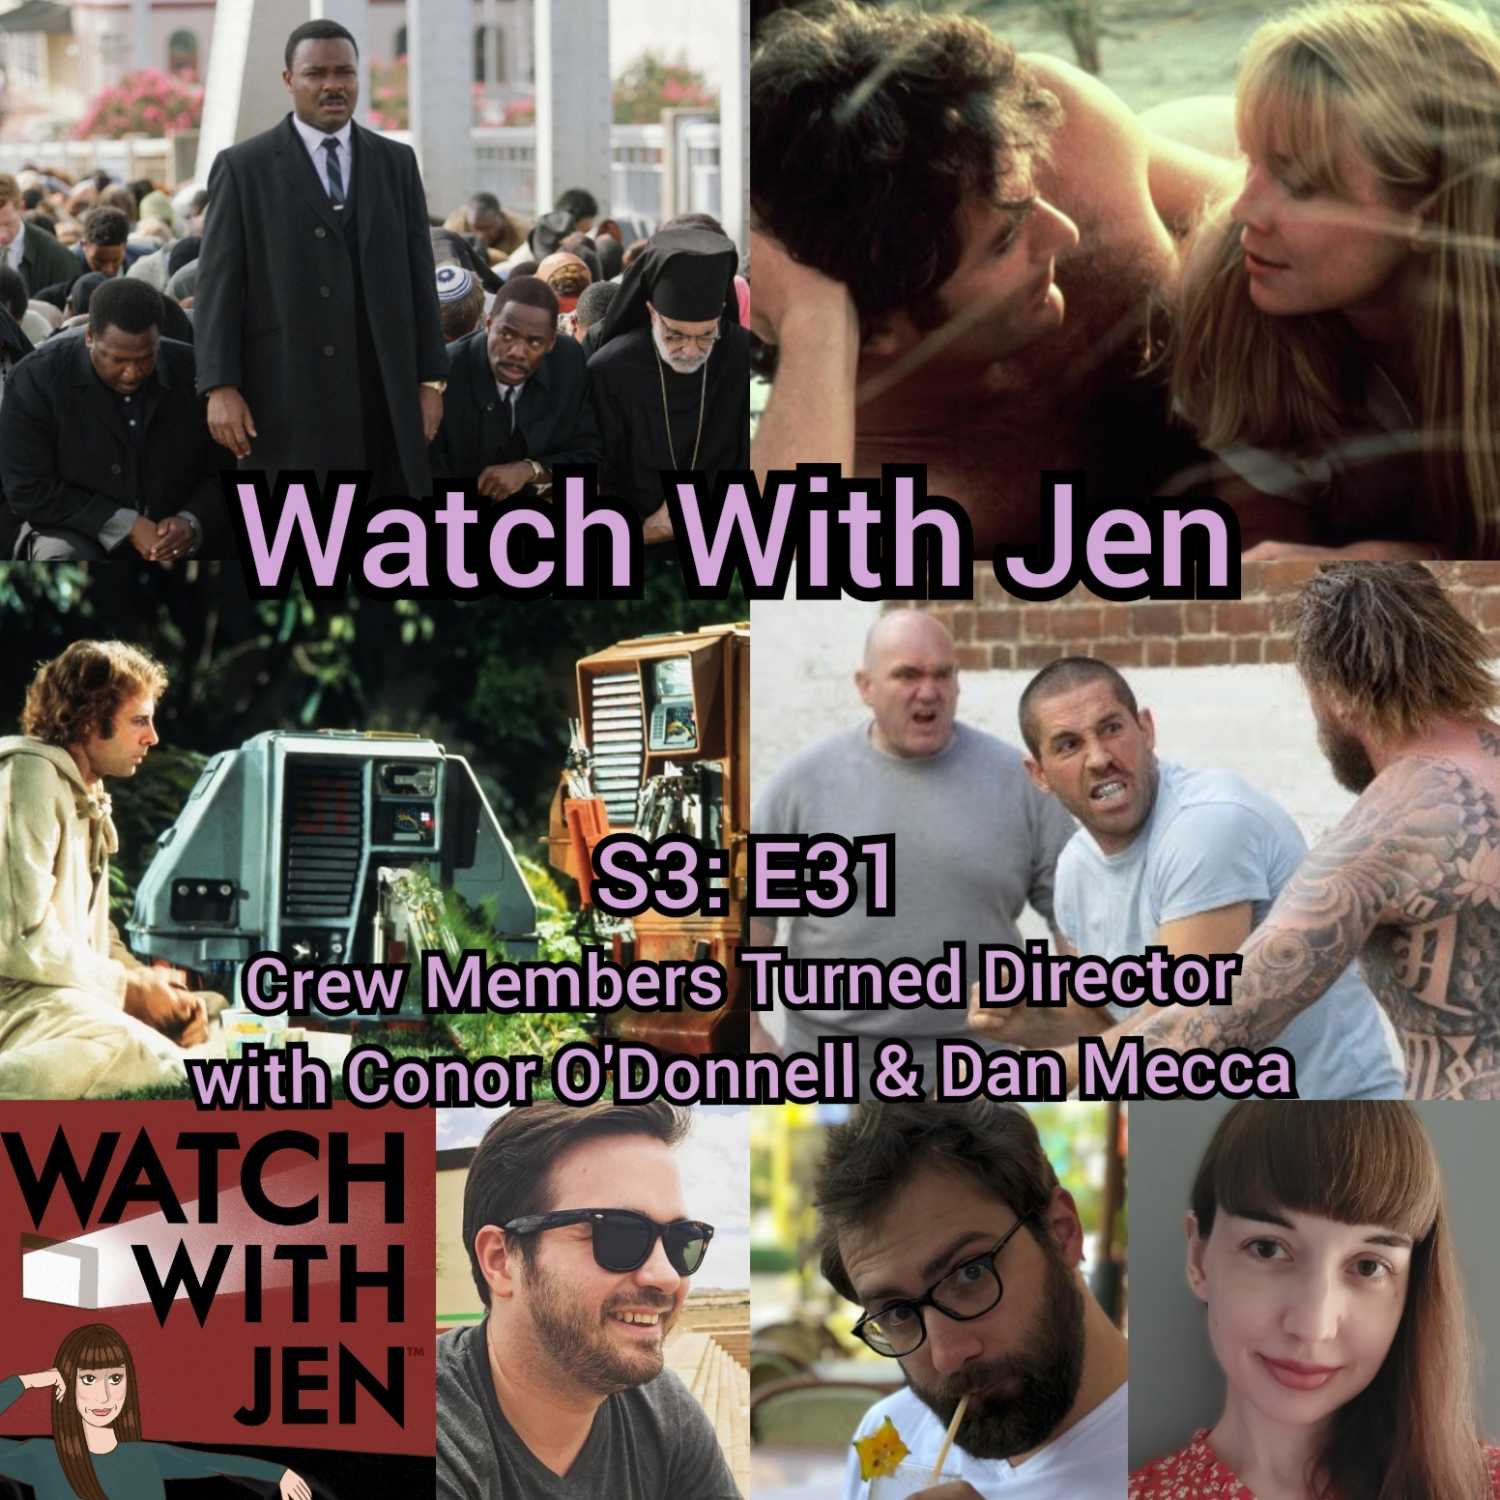 Watch With Jen - S3: E31 - Crew Members Turned Director with Conor O’Donnell & Dan Mecca